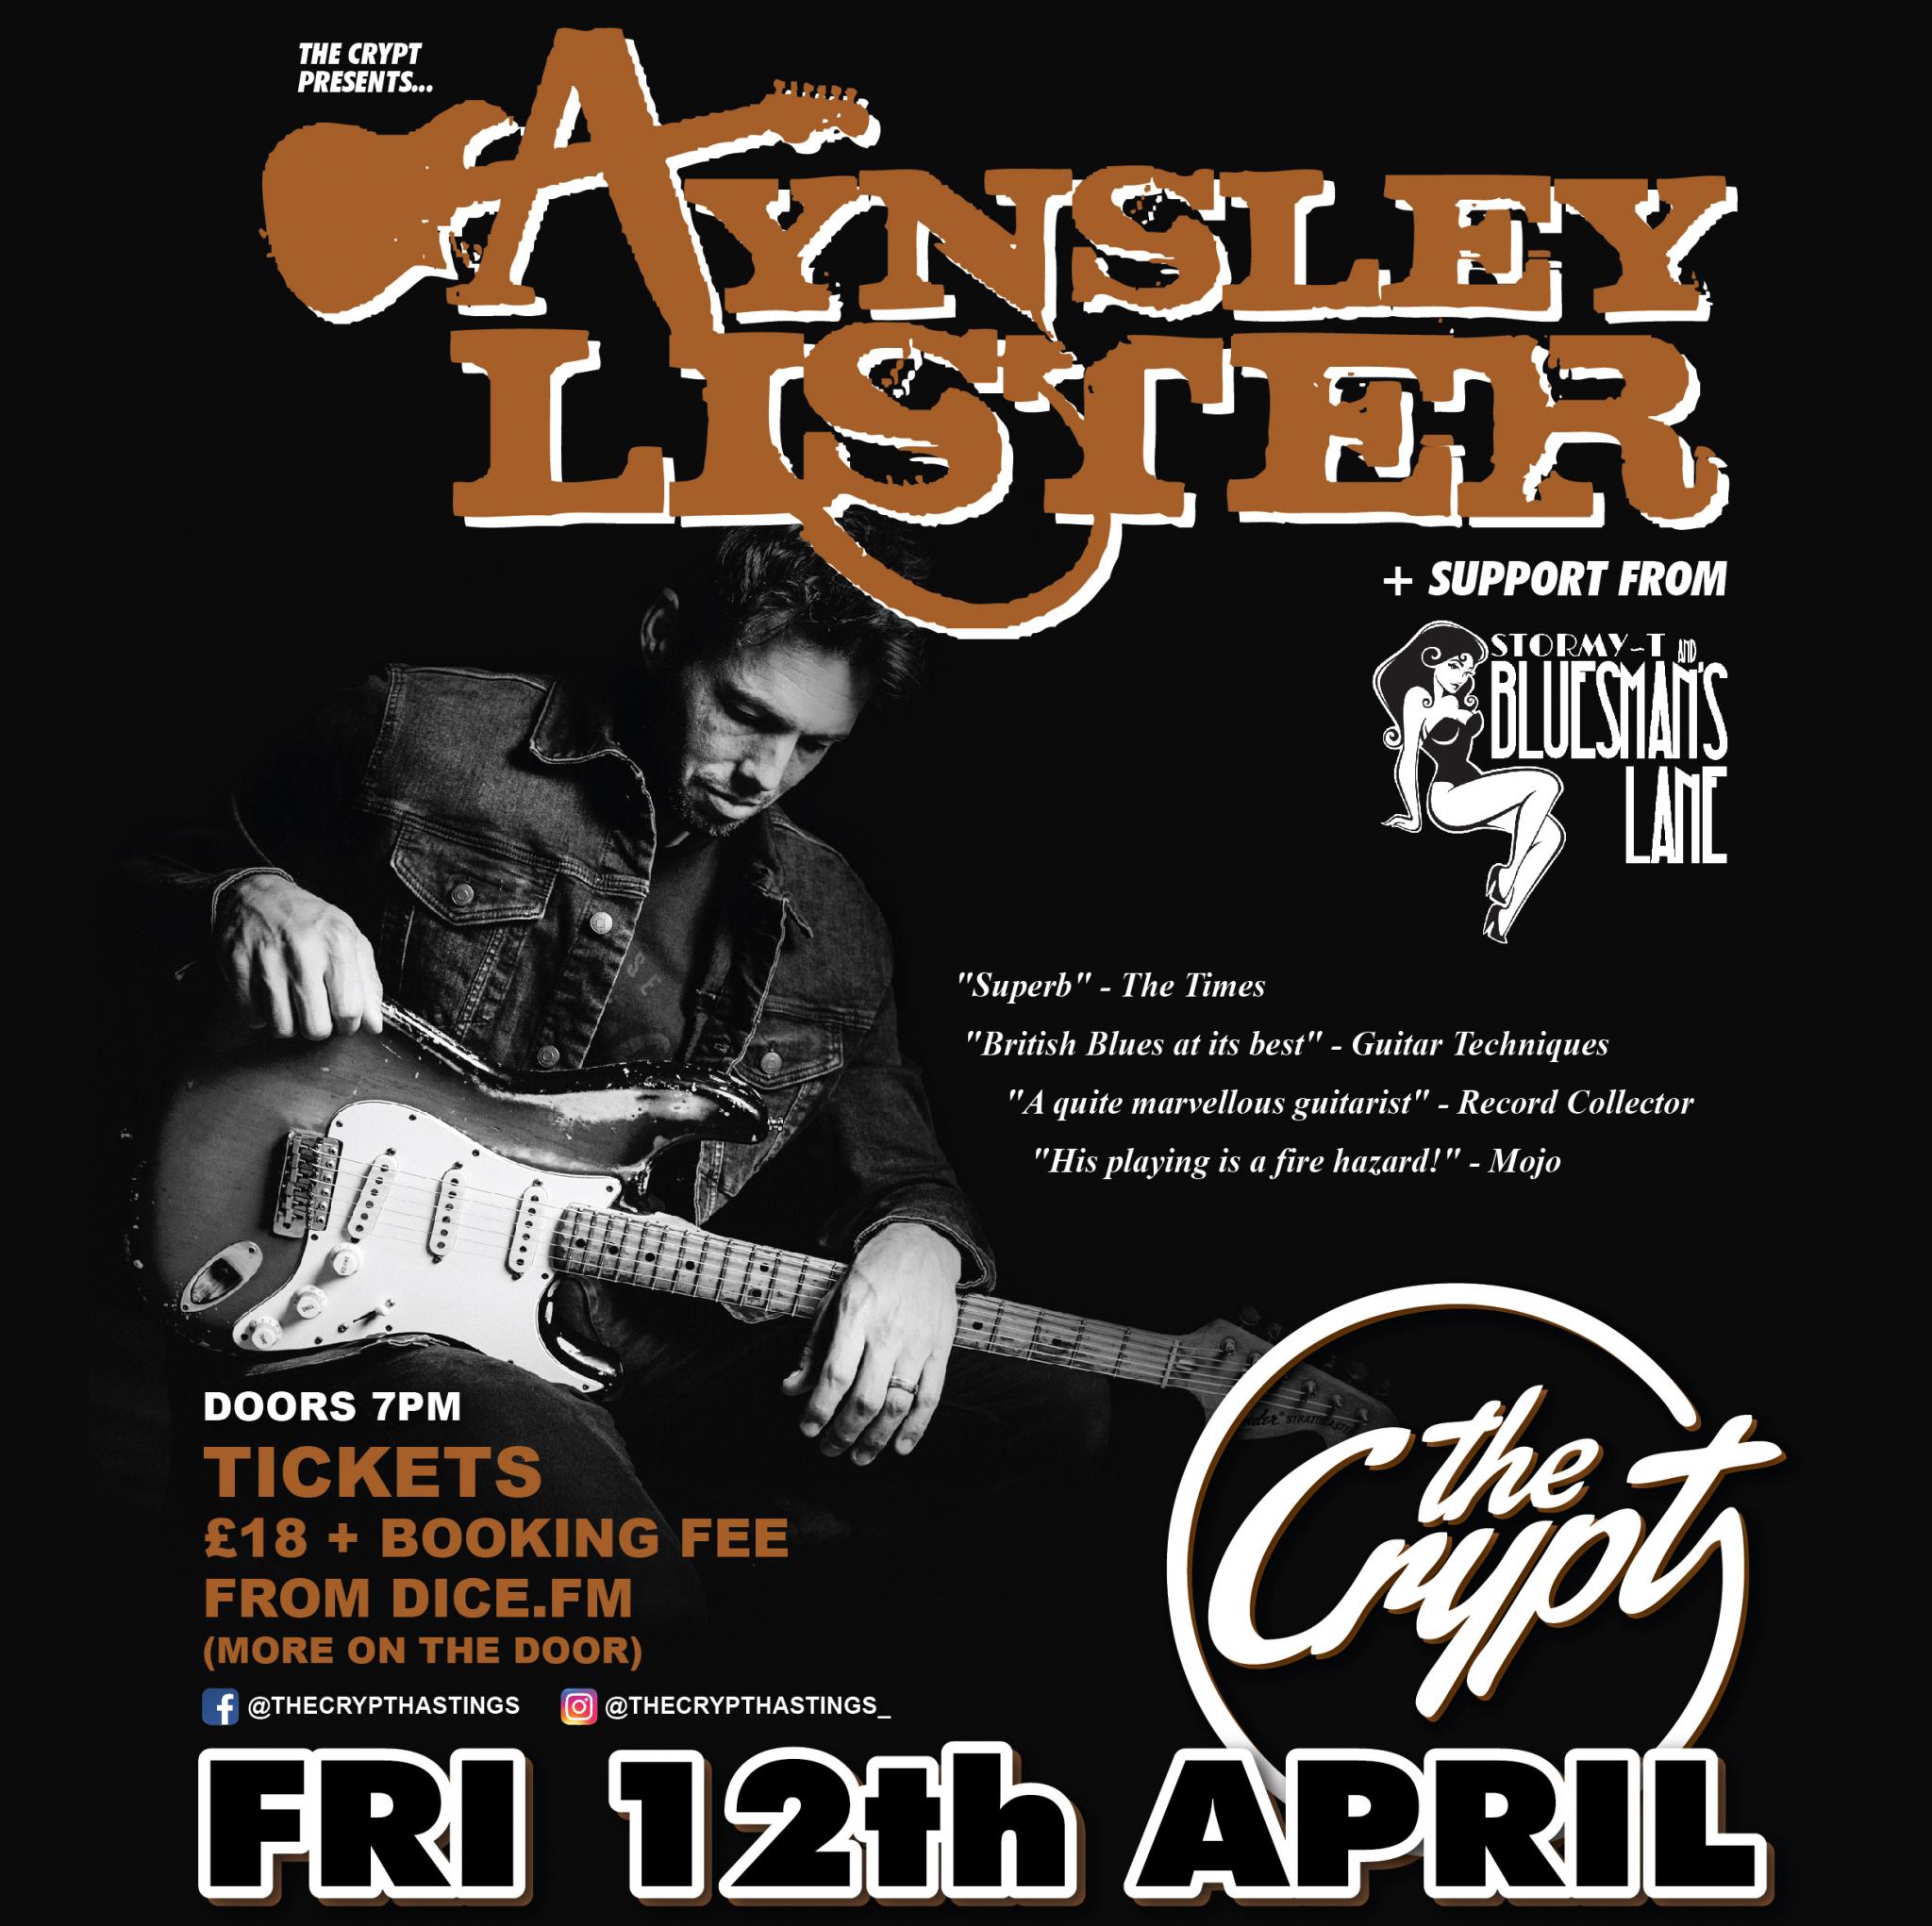 Aynsley Lister + support from Stormy-T & Bluesman's Lane live @ The Crypt